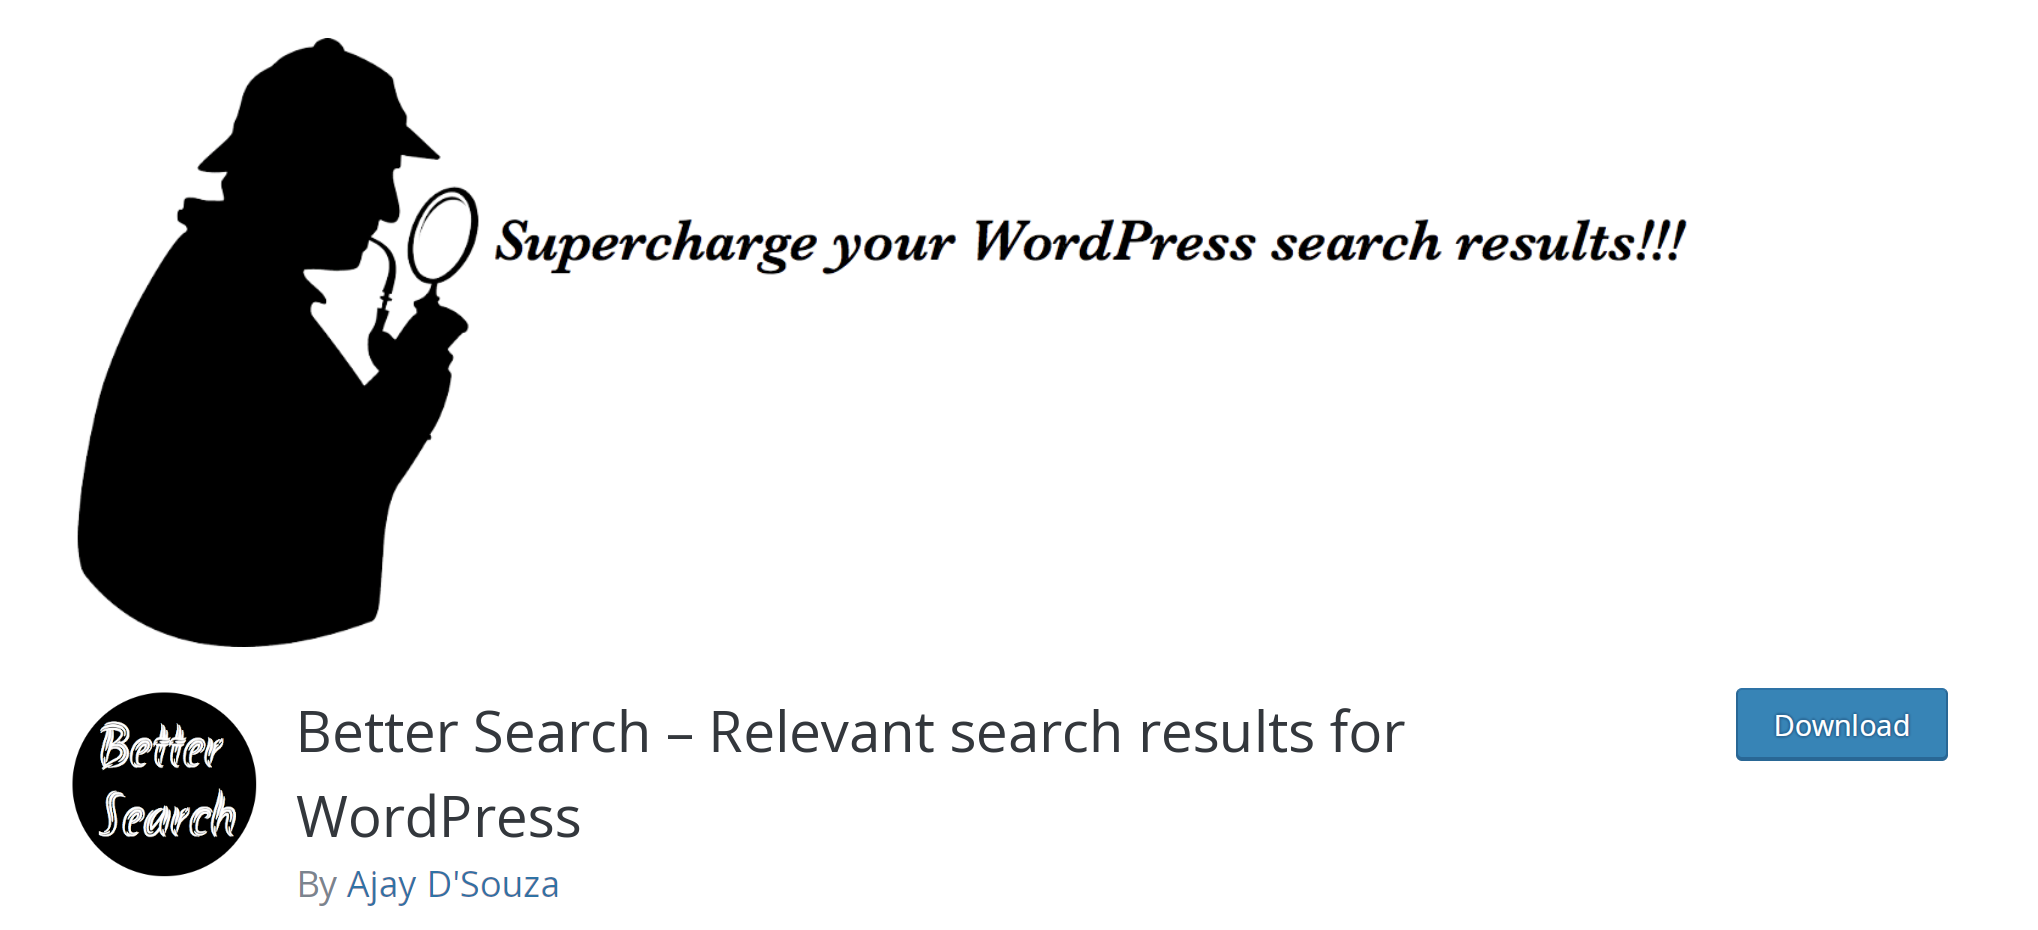 Better Search listing in the WordPress repository